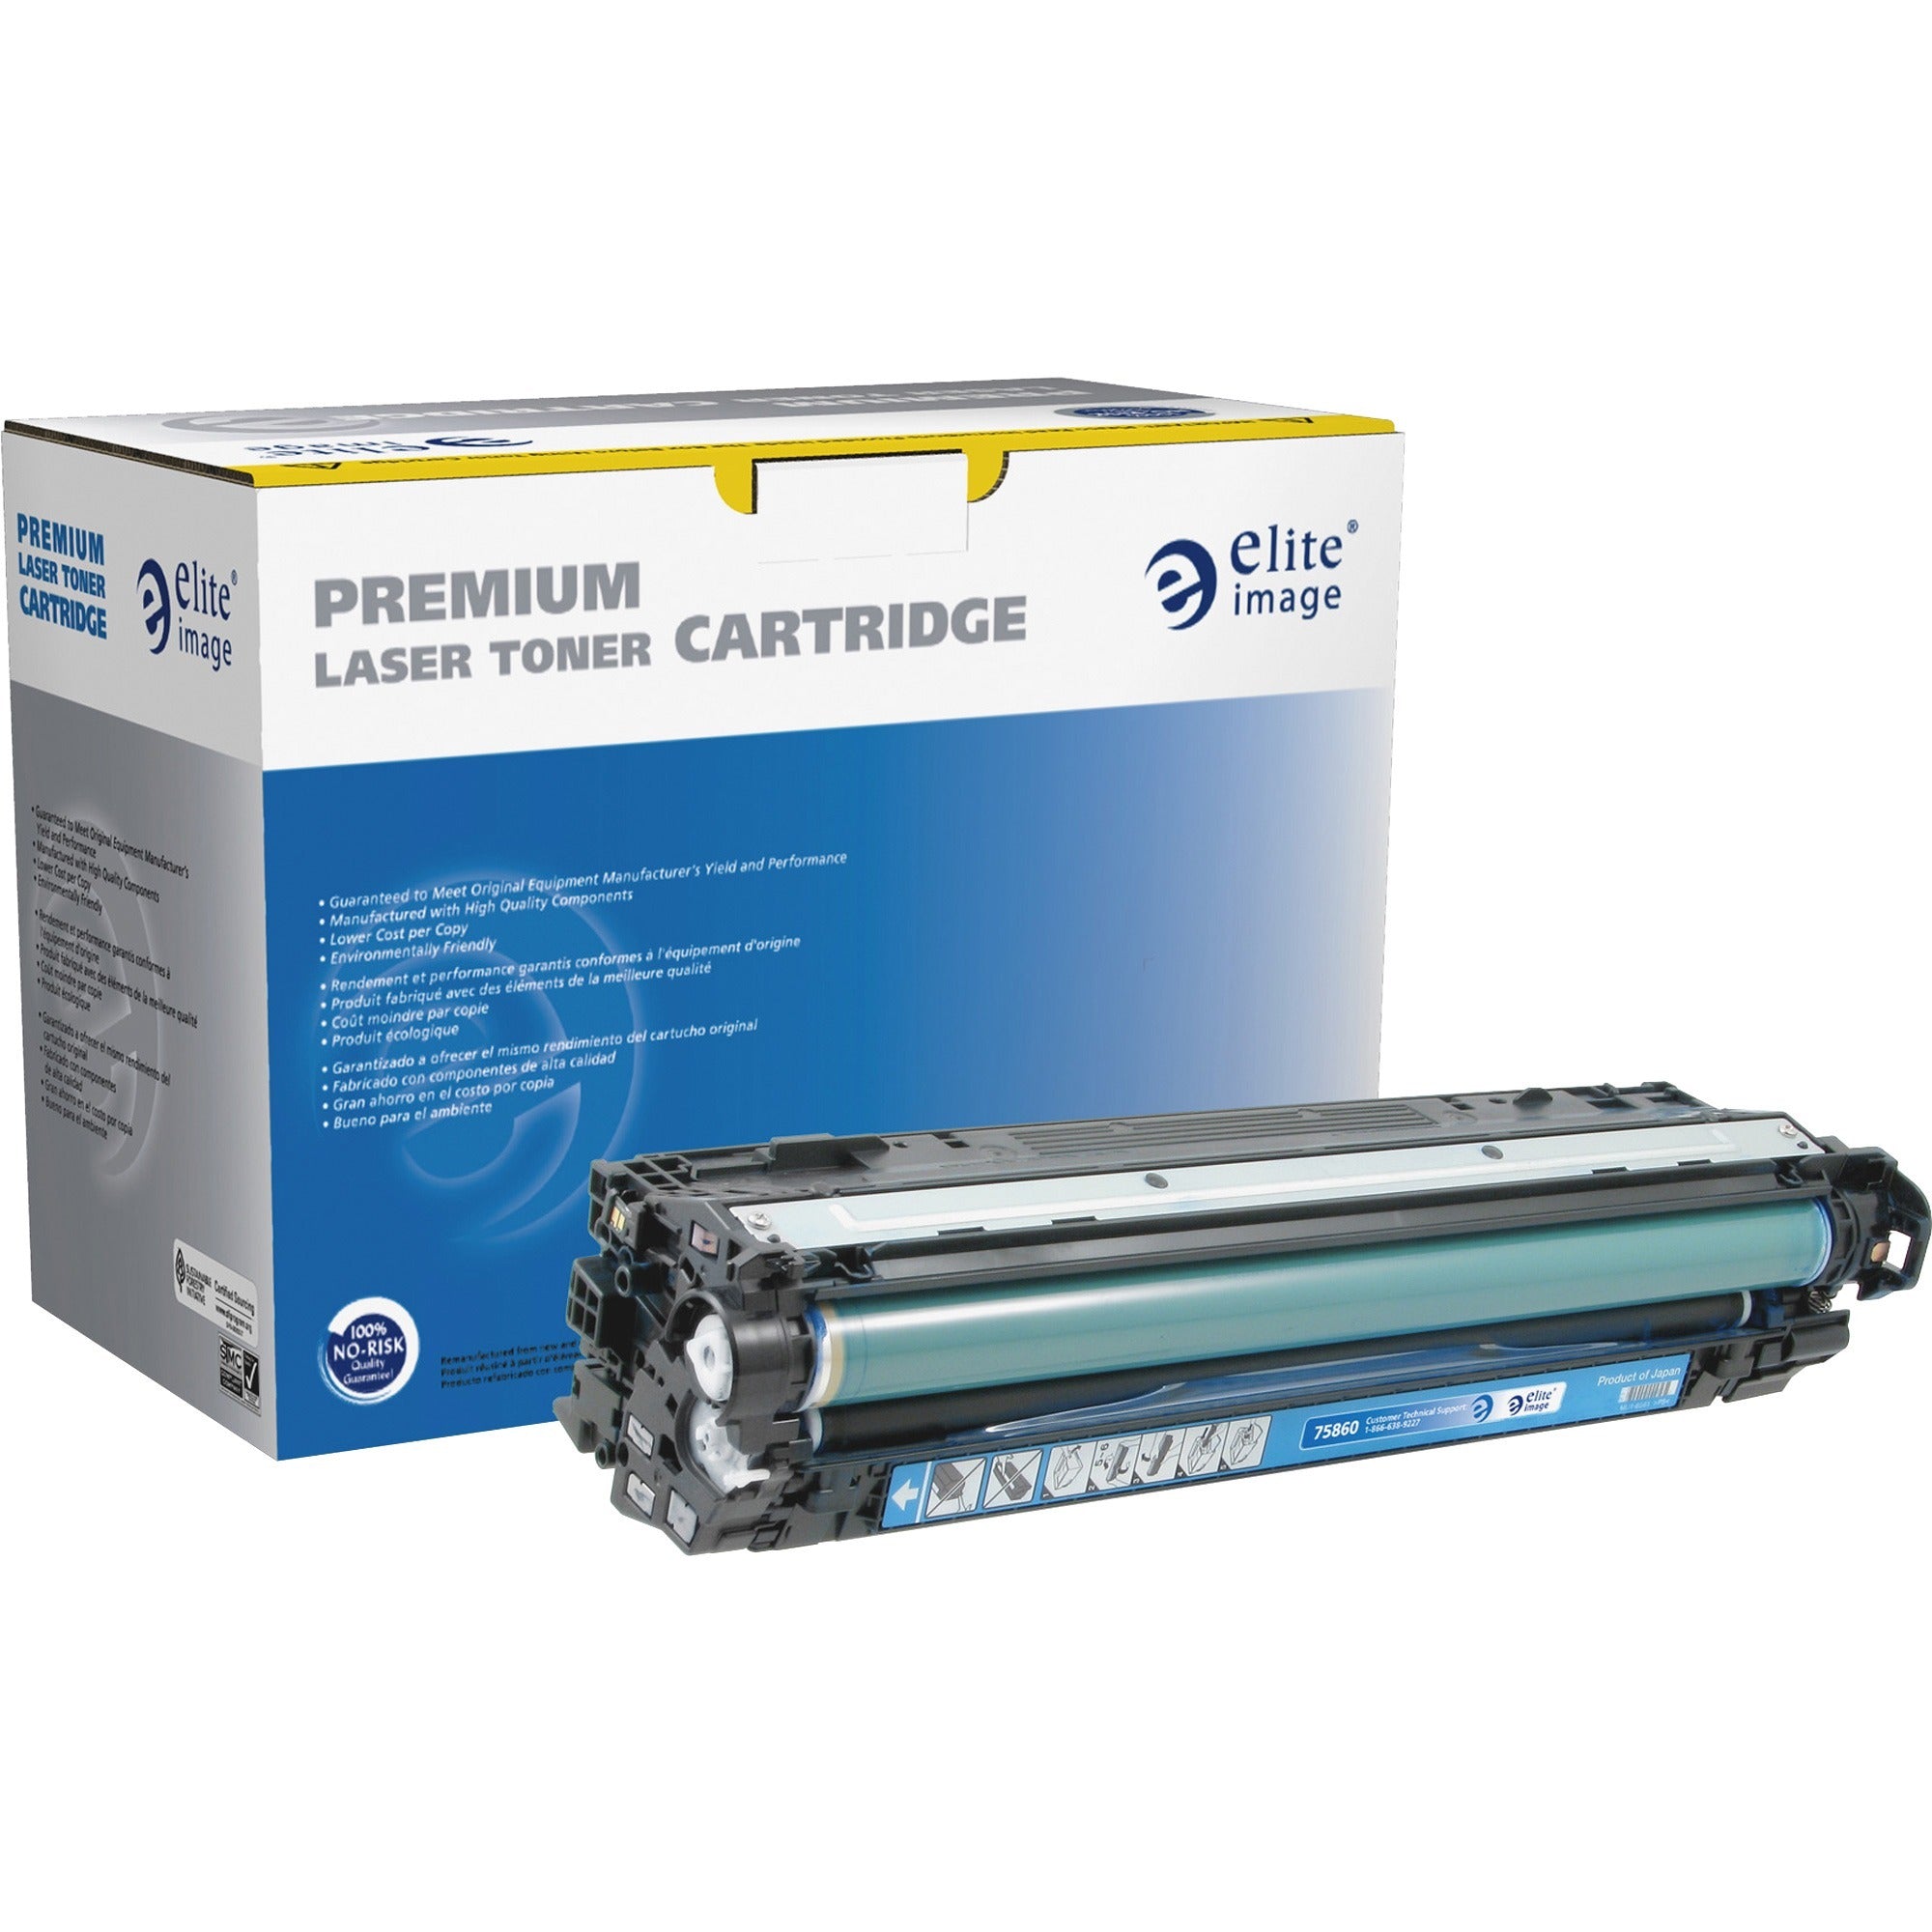 Elite Image Remanufactured Toner Cartridge - Alternative for HP 307A (CE741A) - Laser - 7300 Pages - Cyan - 1 Each - 1